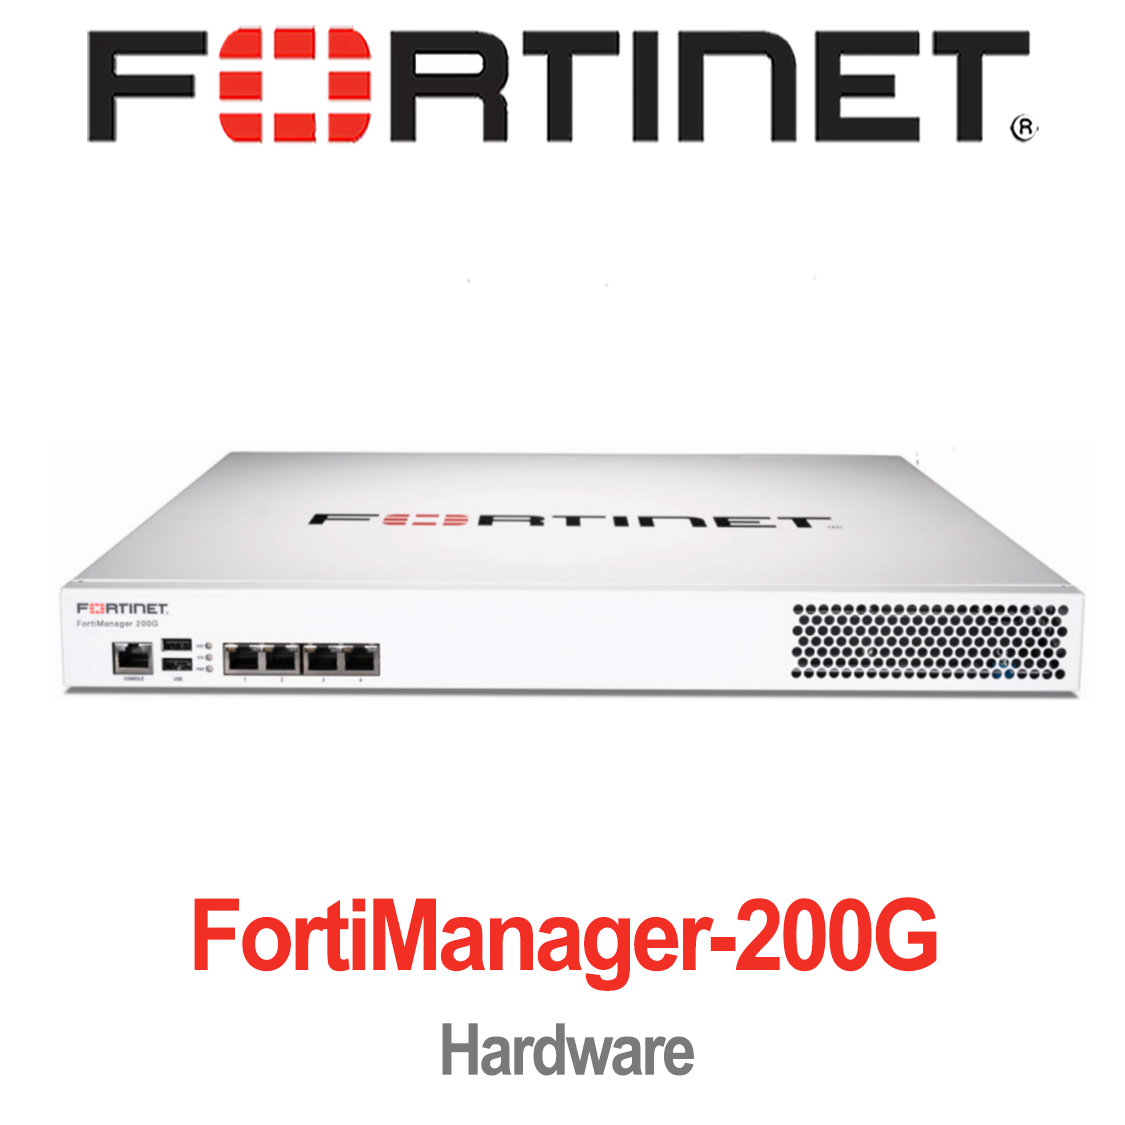 FortiManager 200G